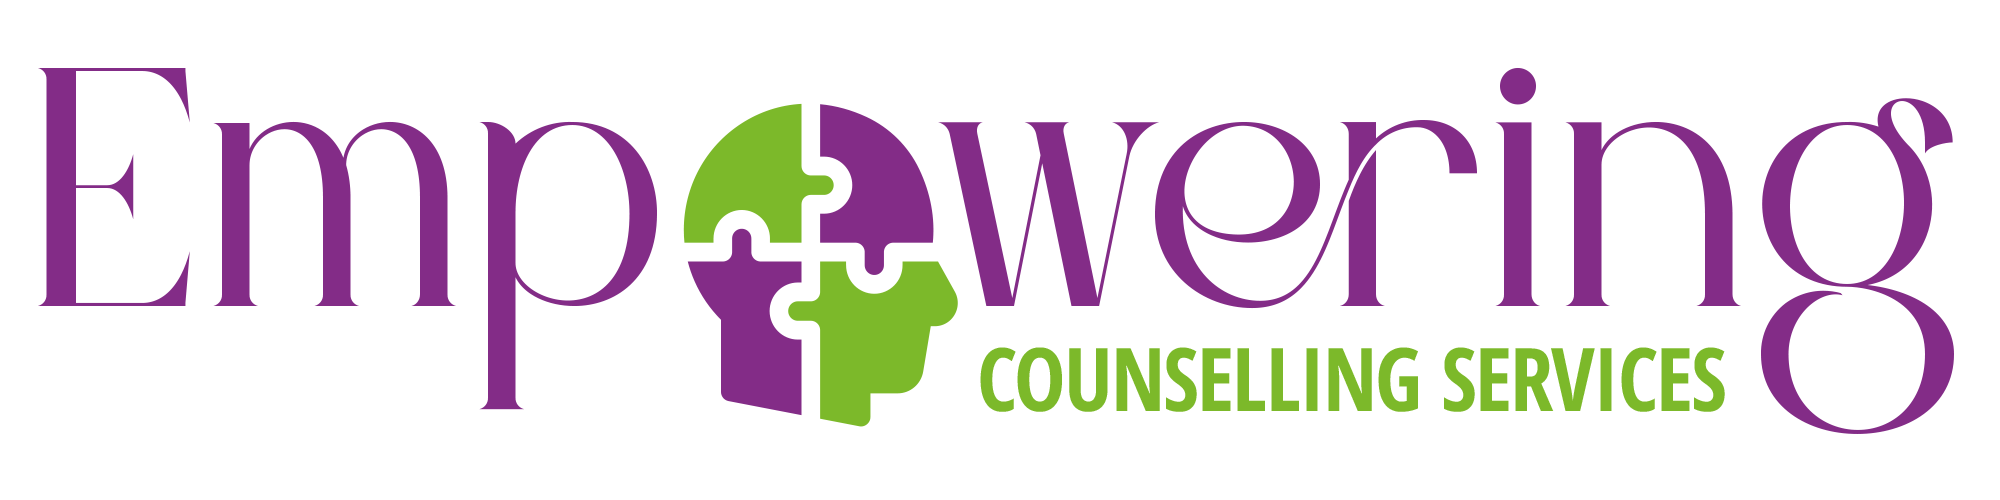 Empowering Counselling Services